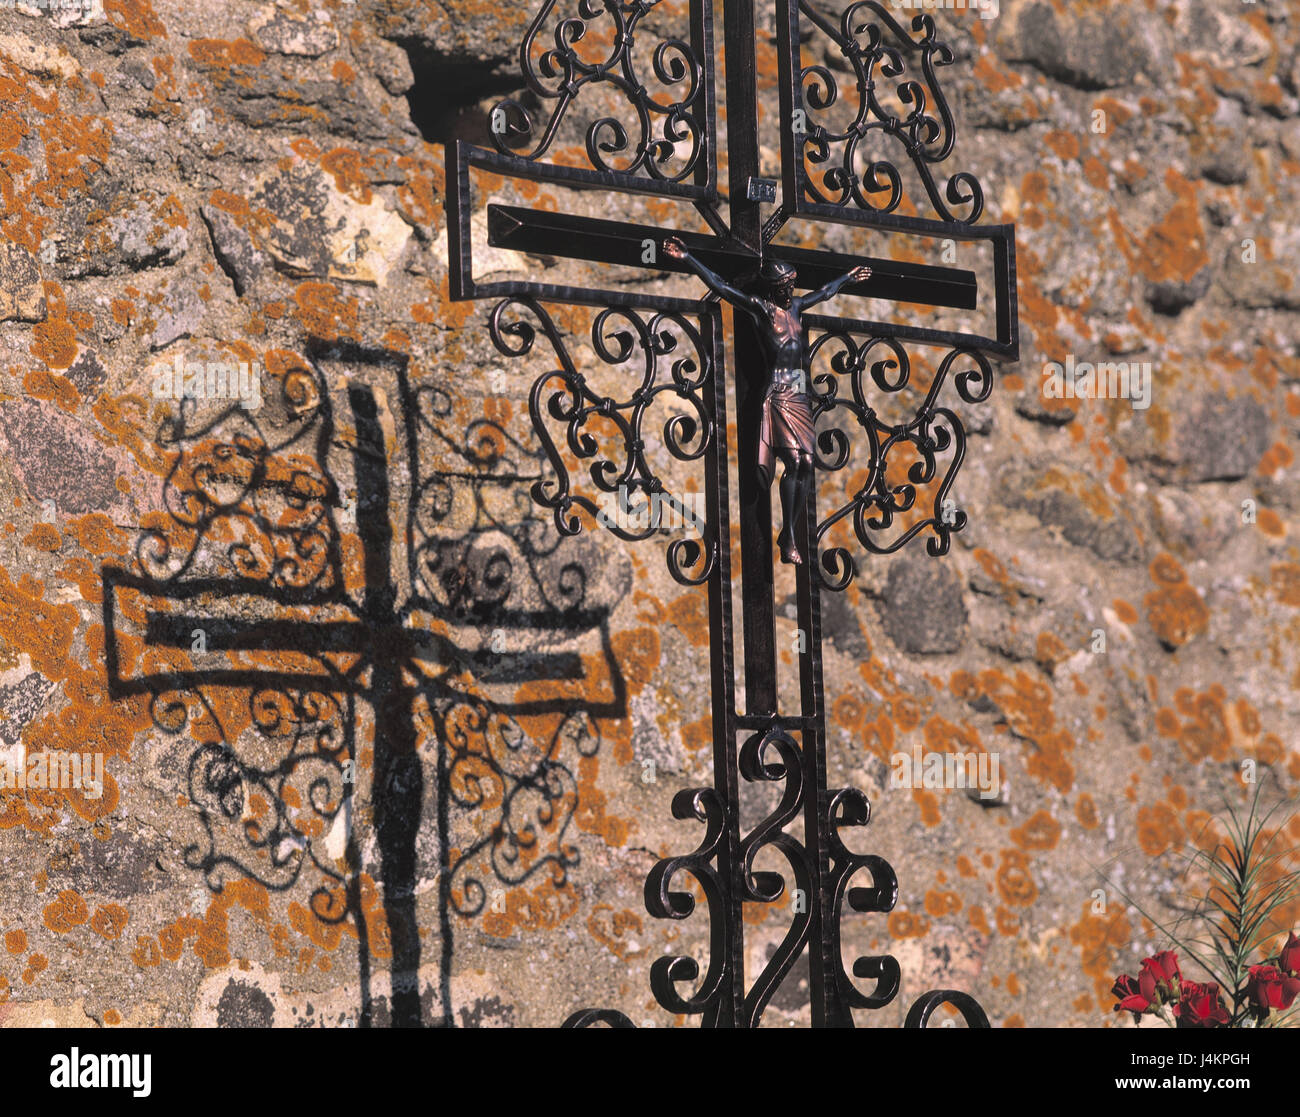 Austria, Lower Austria, forest fourth, brook Frieders, cemetery, defensive wall, cross, shade Europe, cemetery defensive wall, stone defensive wall, lichens, covered, tomb cross, tomb, iron cross, smith-iron, forged, ornament, sample, silhouette, faith, religion, Christianity Stock Photo